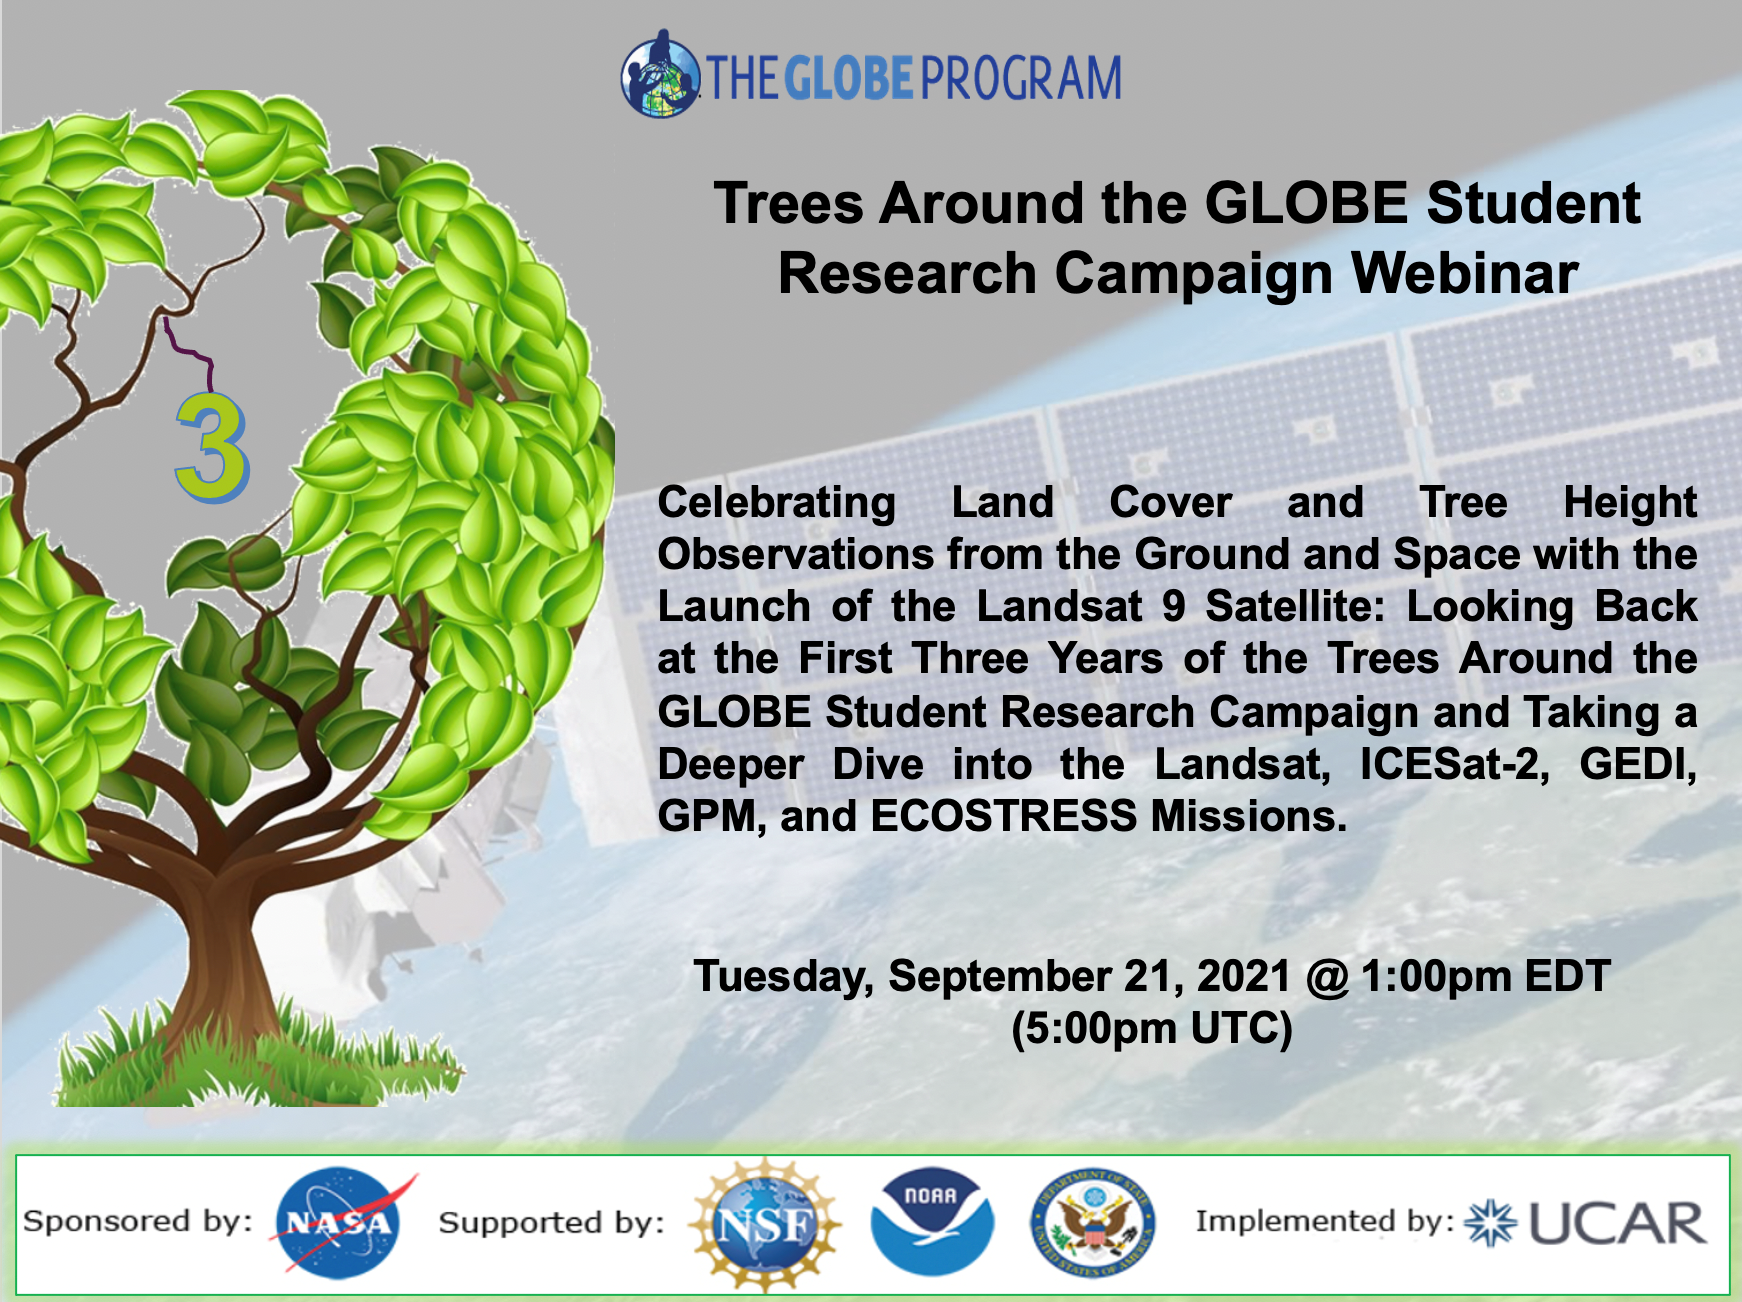 Trees Around the GLOBE 21 September Webinar sharable, showing a tree and reading "Trees Around the GLOBE Student Research Campaign Webianr"